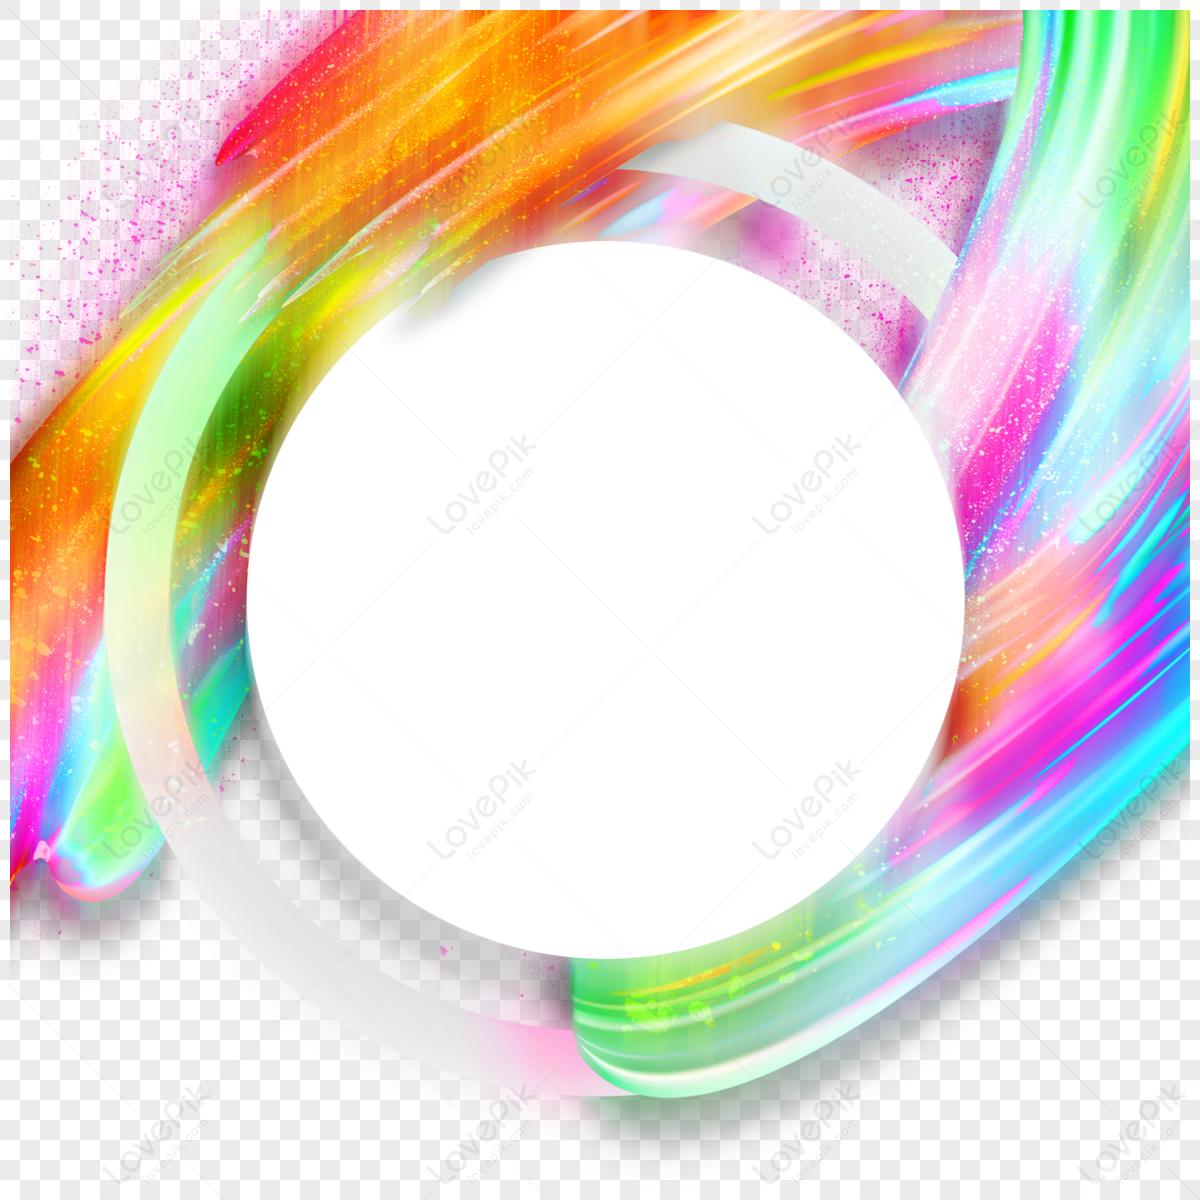 abstract gradient rainbow line frame background illustration